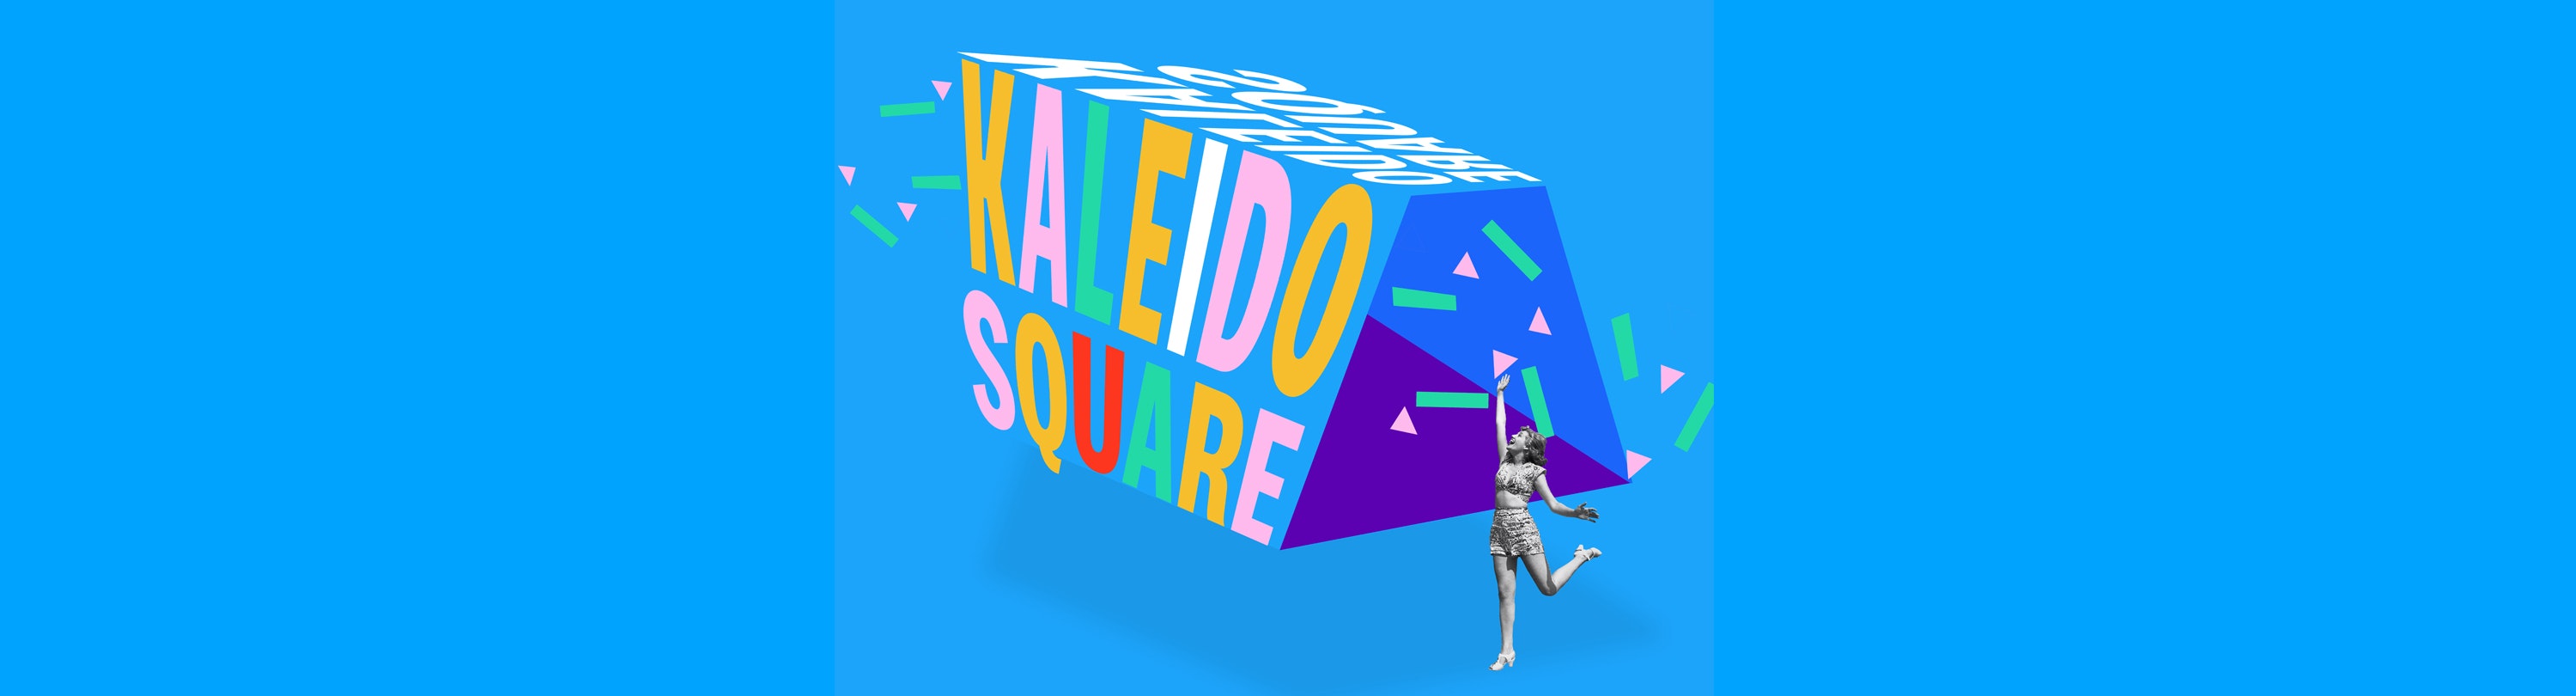 A celebratory illustration of a woman throwing confetti-like shapes in the air next to the word Kaleidosquare